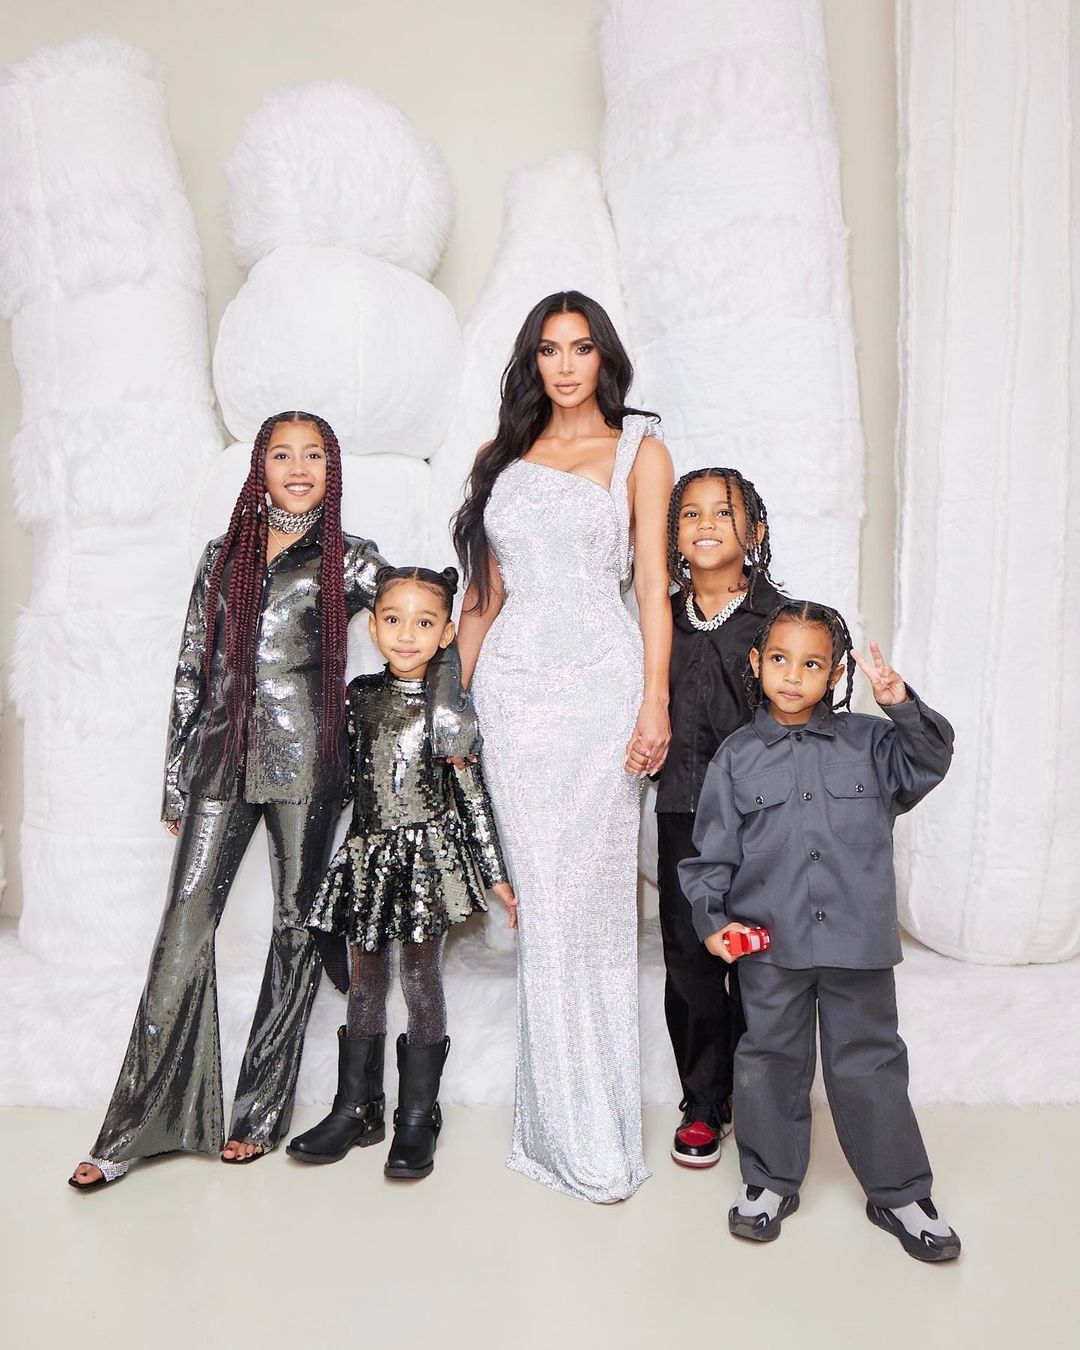 North West and Saint West Making Voice Acting Debuts Alongside Mother